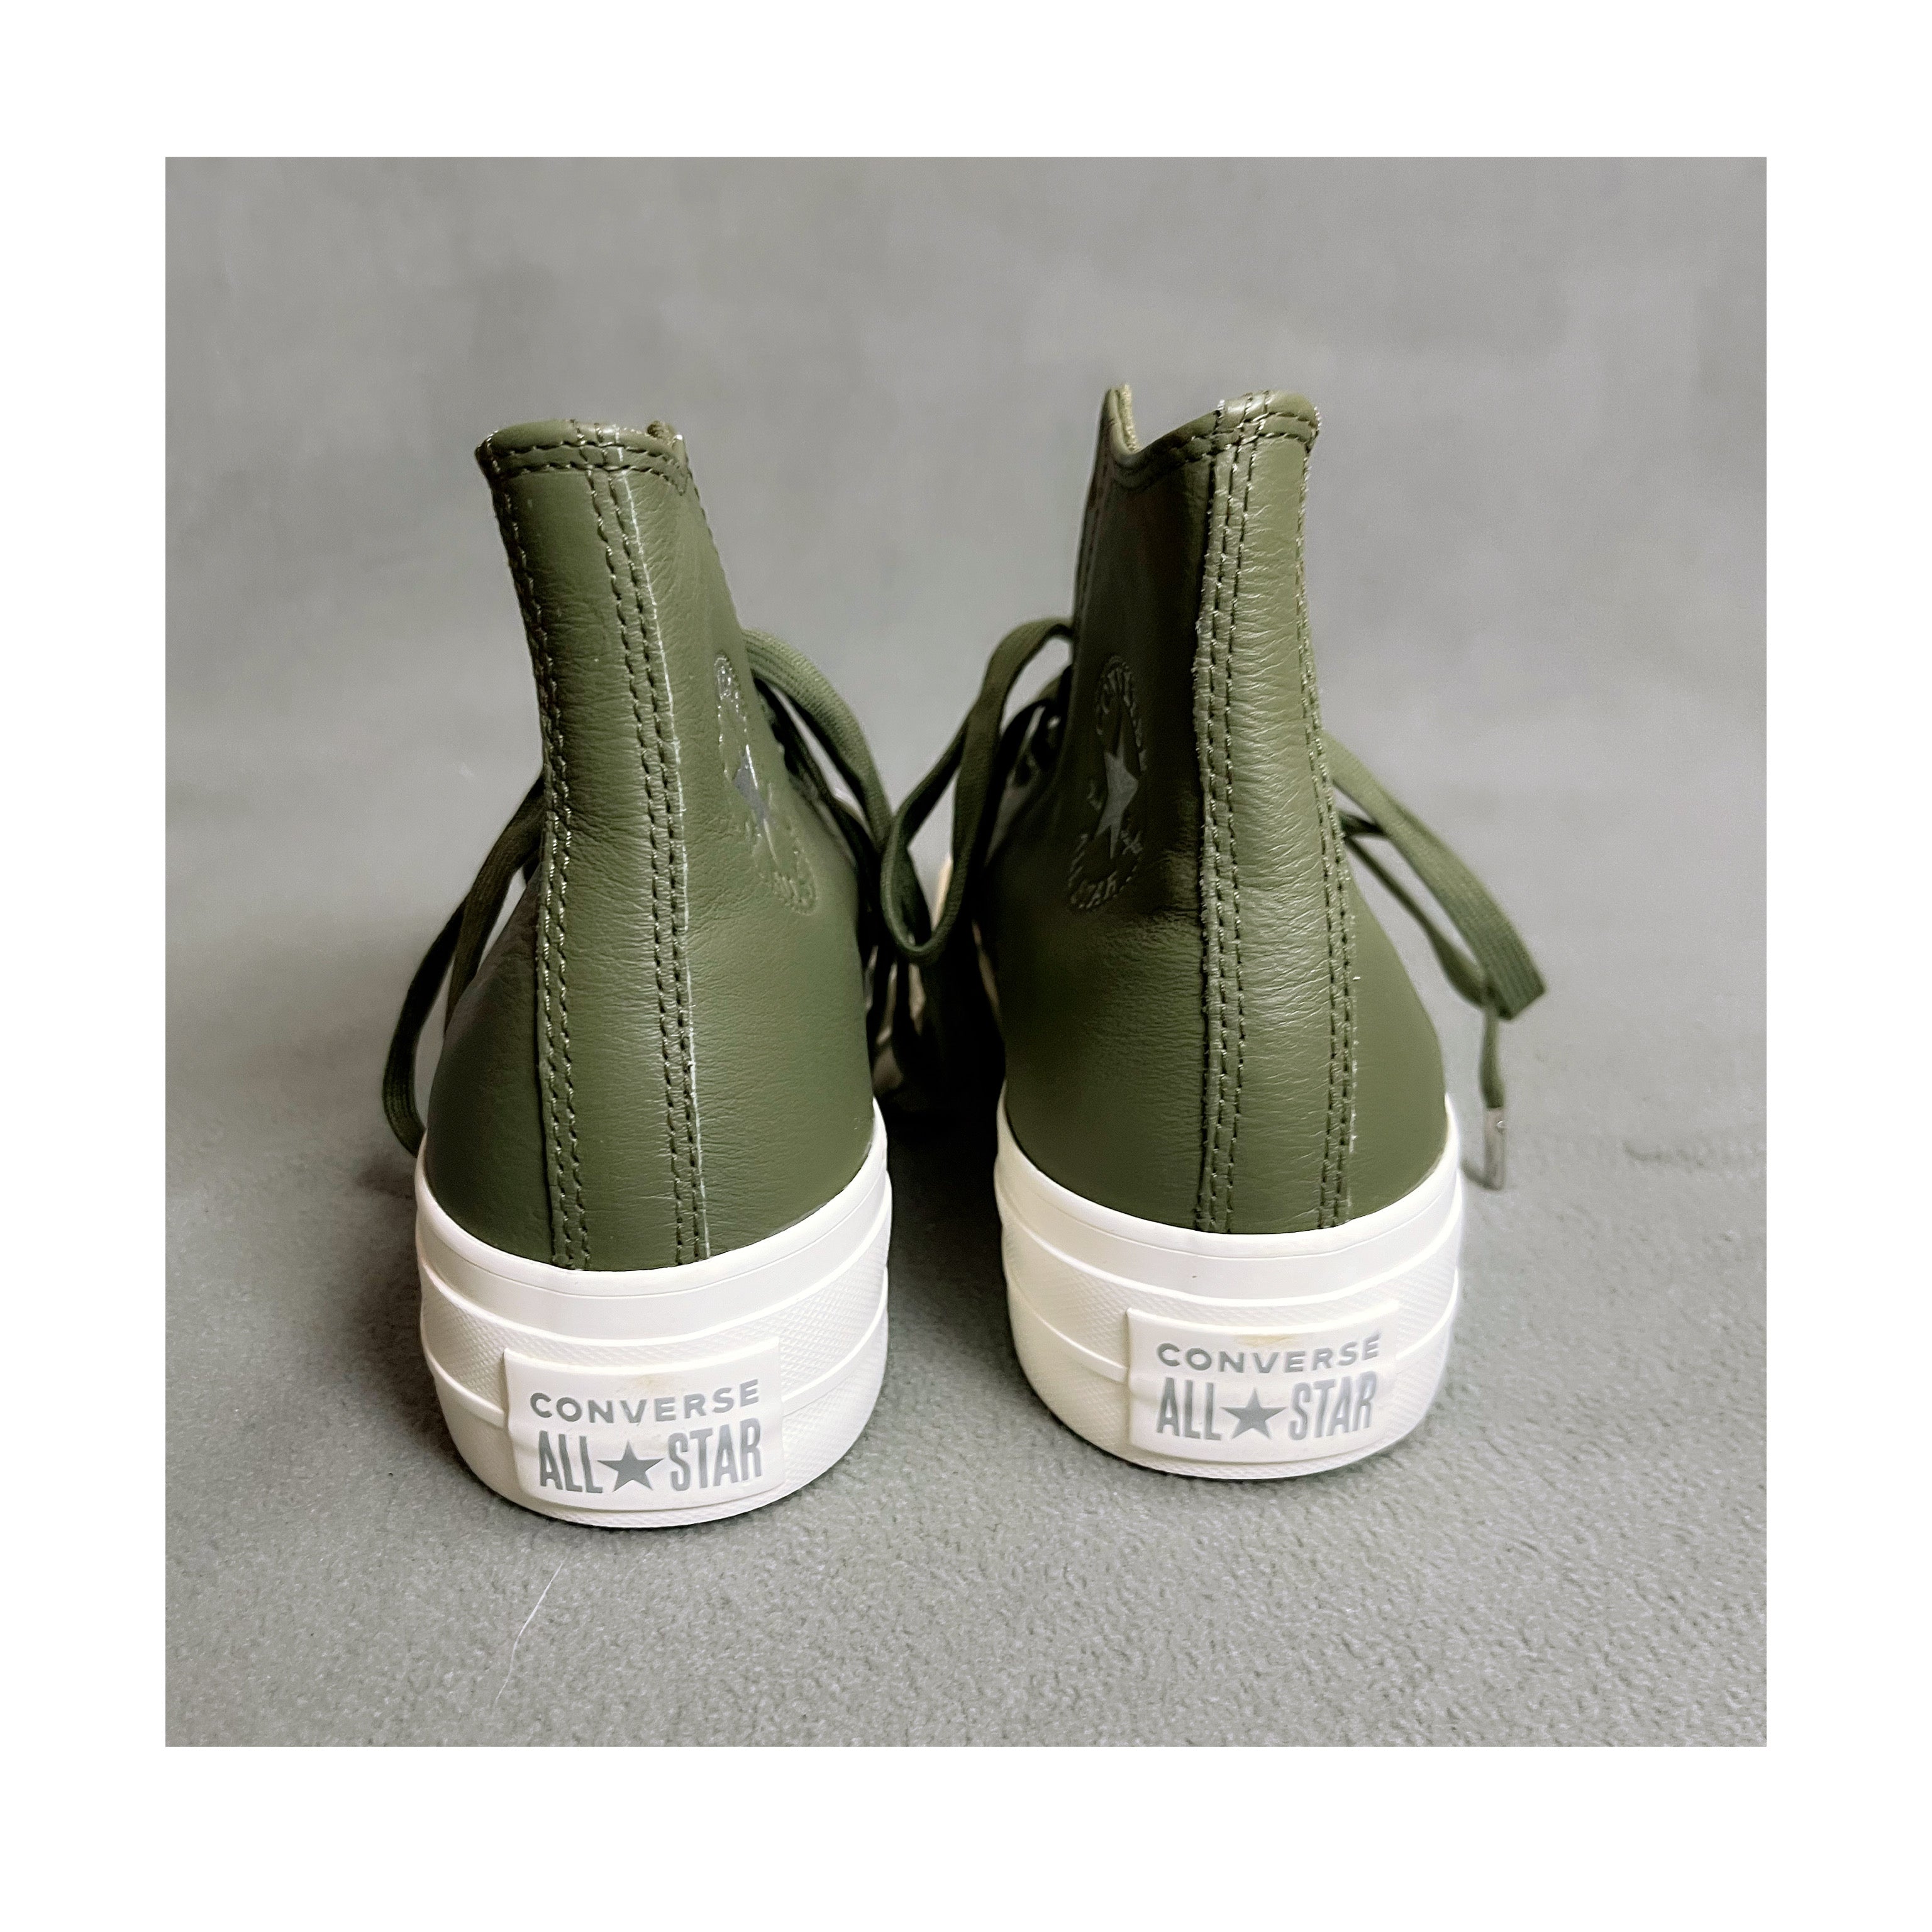 Converse olive leather hi-tops, size 8, NEW IN BOX!